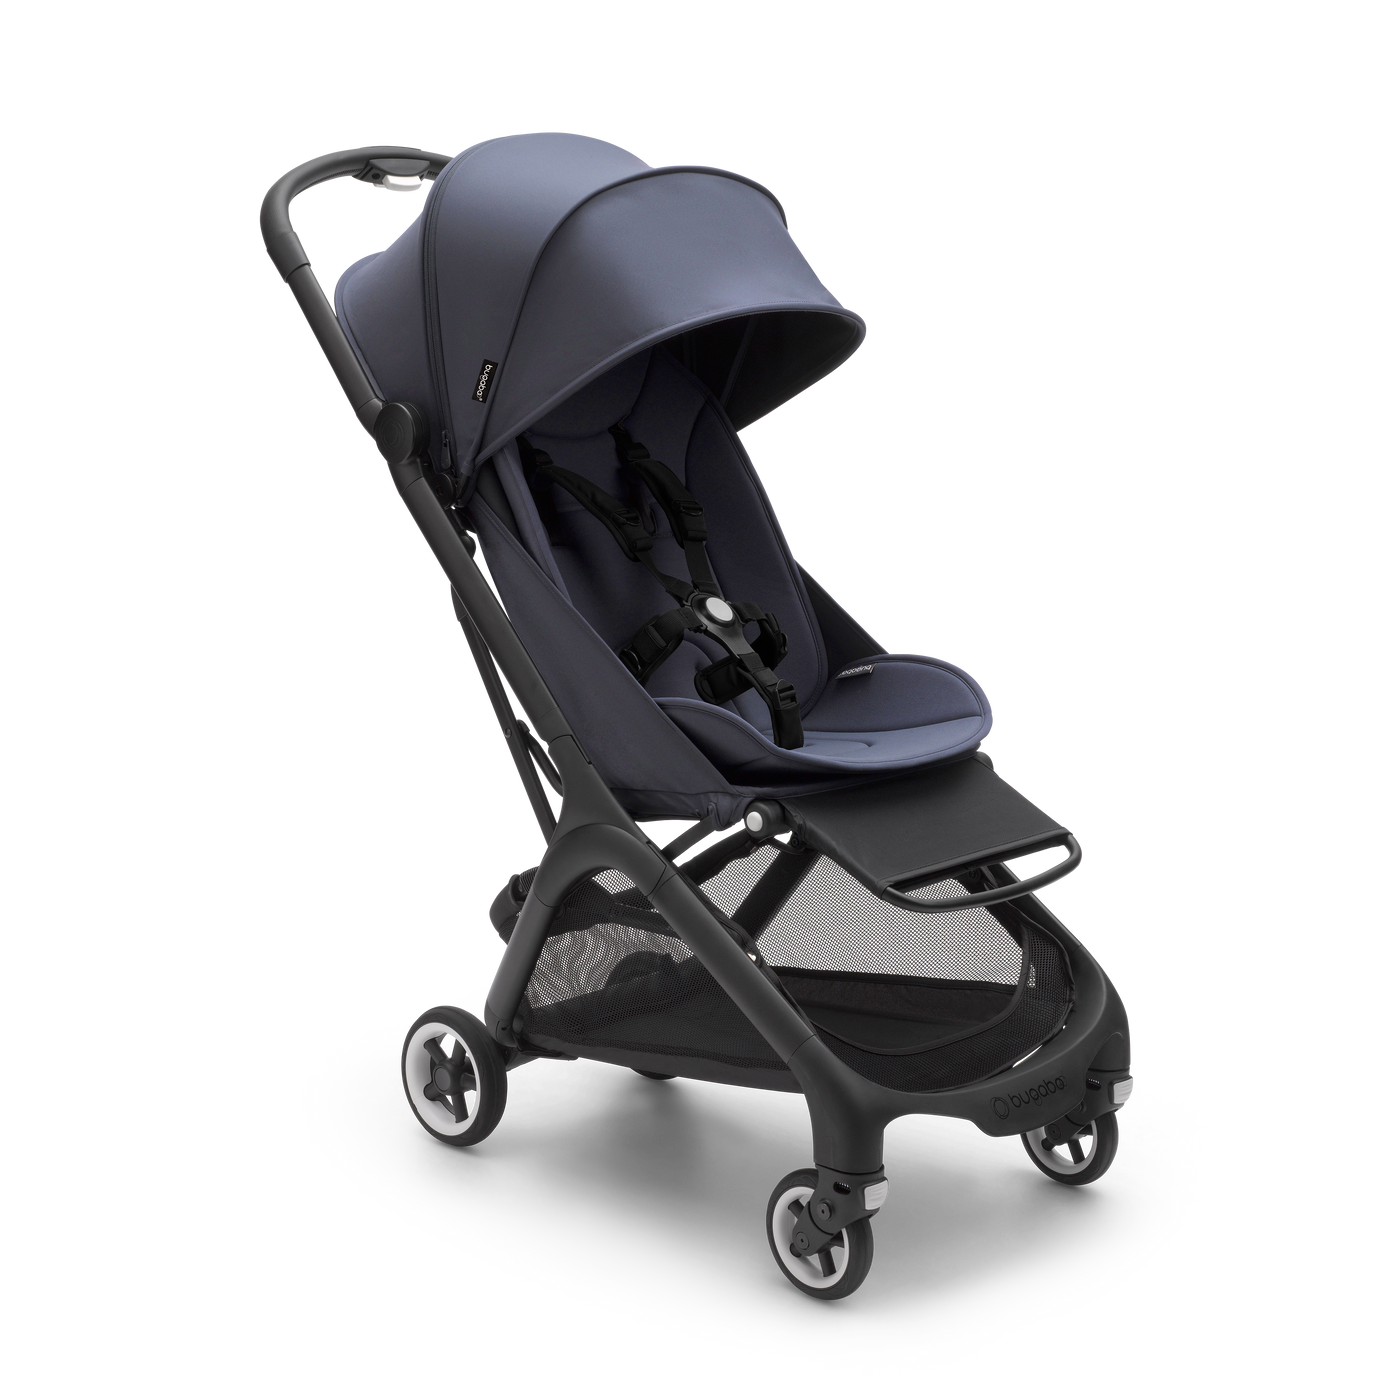 Bugaboo Butterfly Pushchair - Black/Stormy Blue